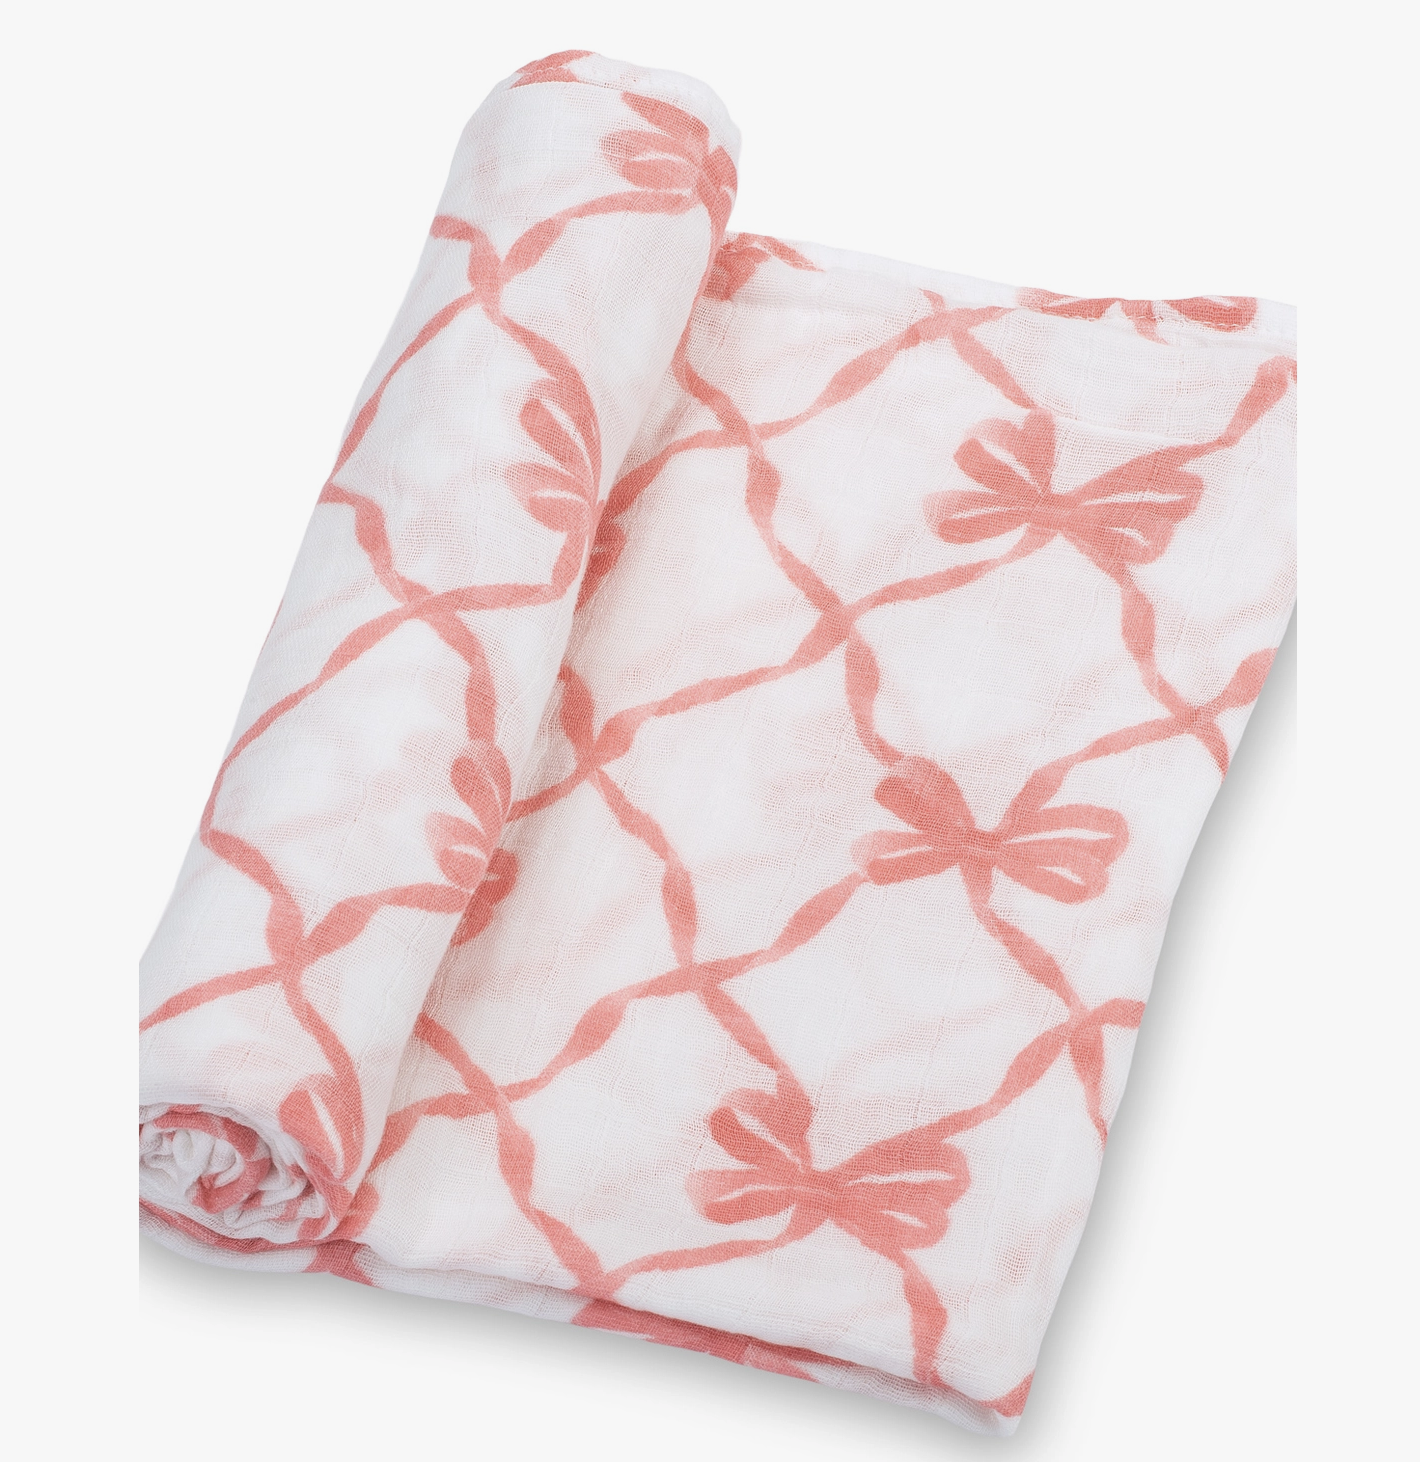 Bows Swaddle